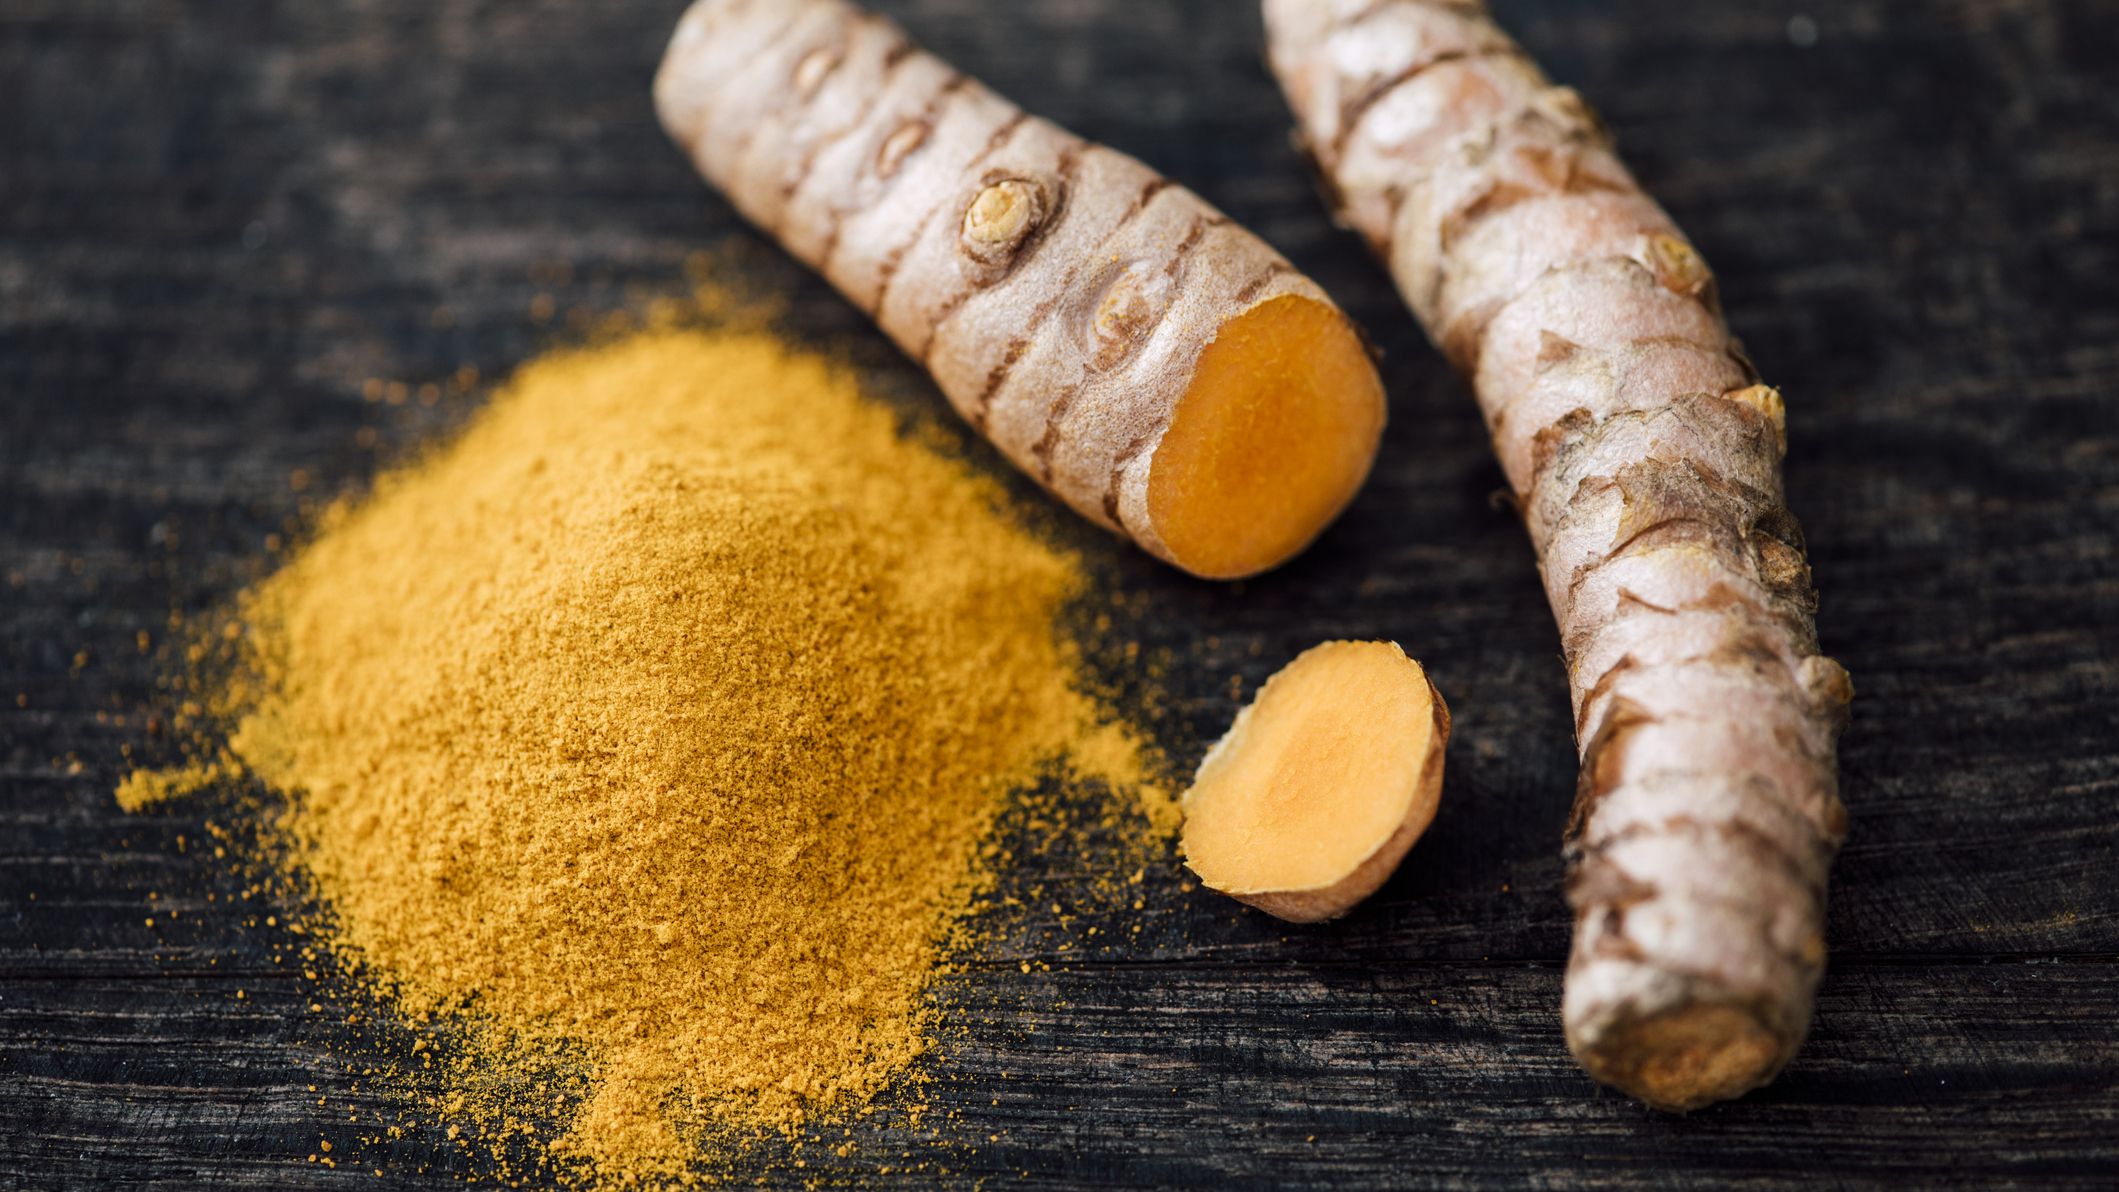 Some tips about turmeric uses